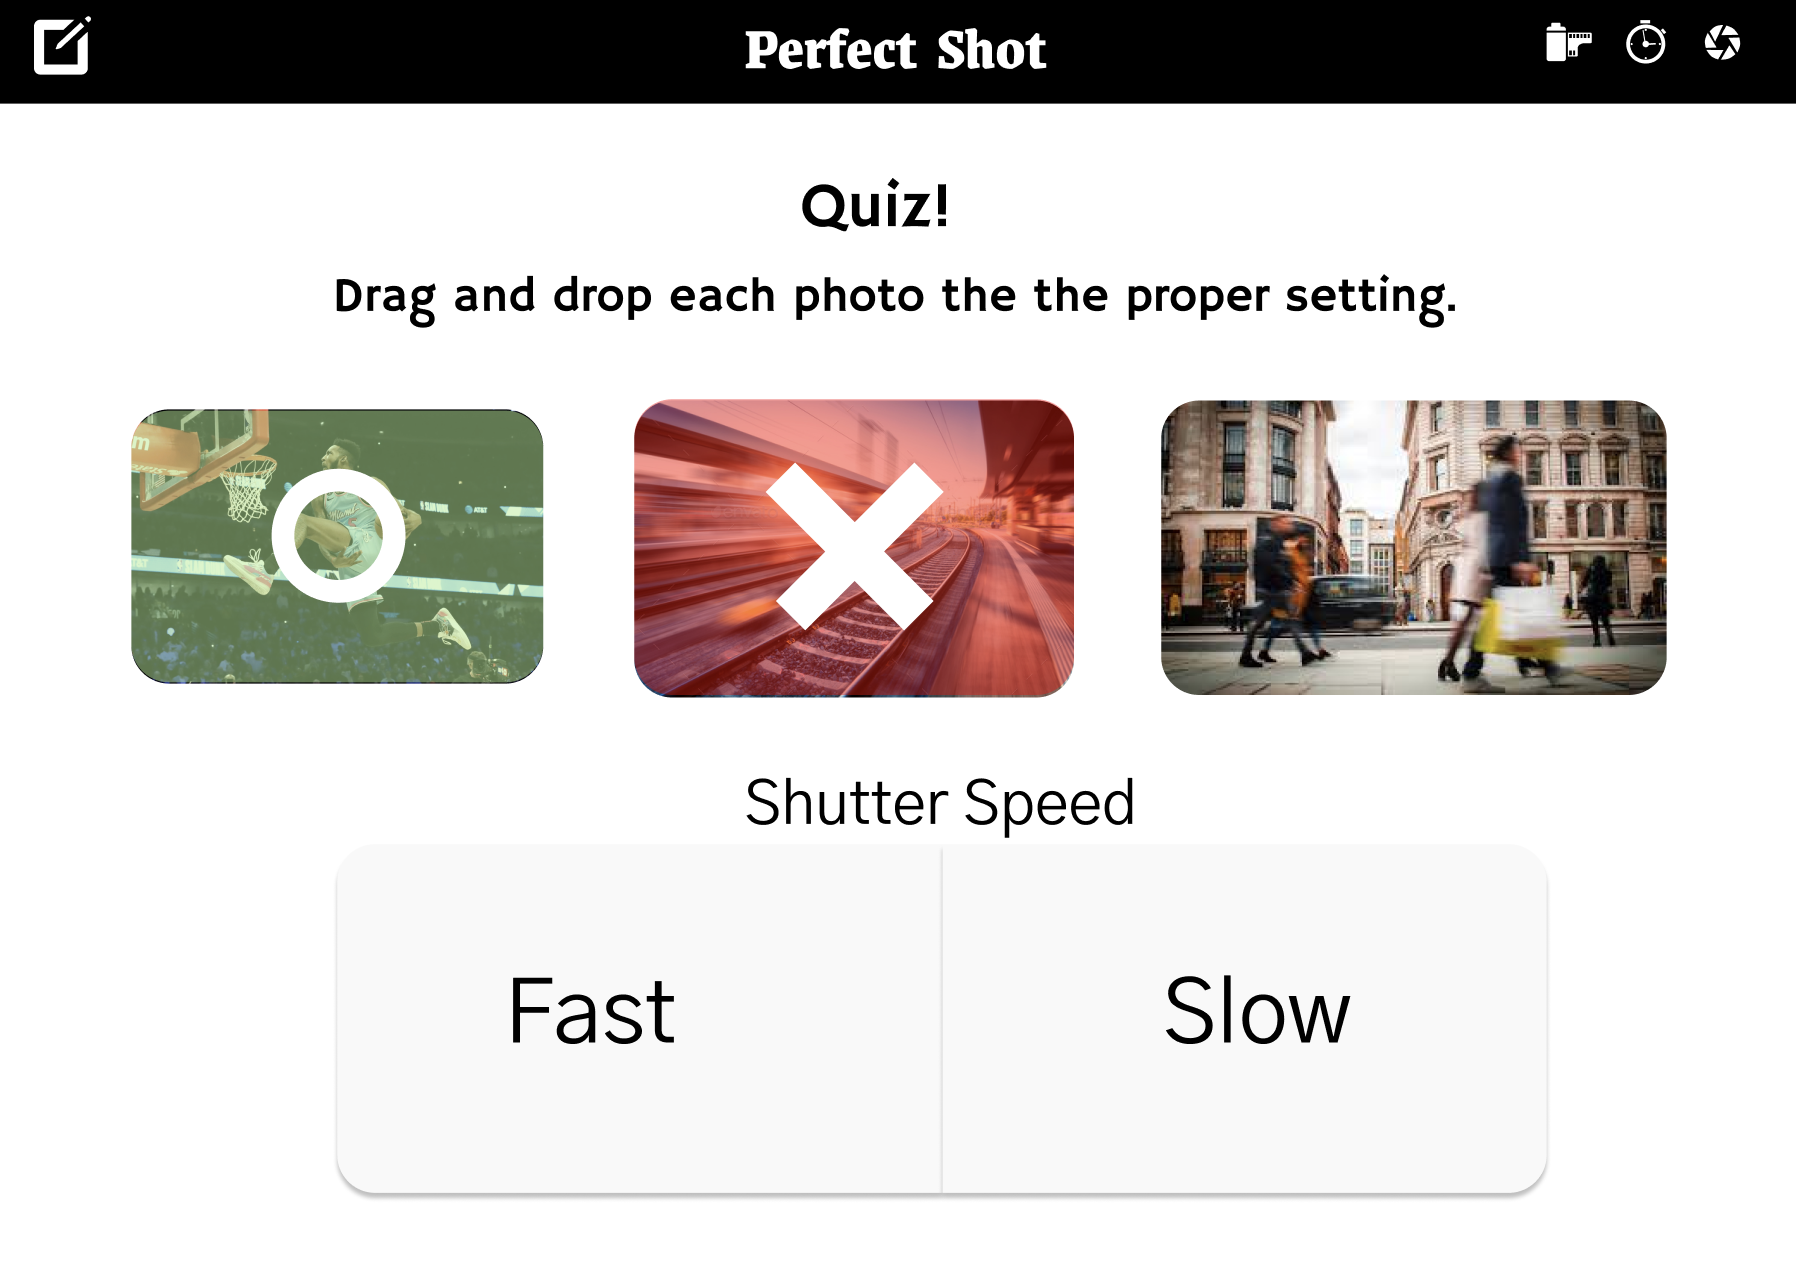 Perfect Shot quiz page.